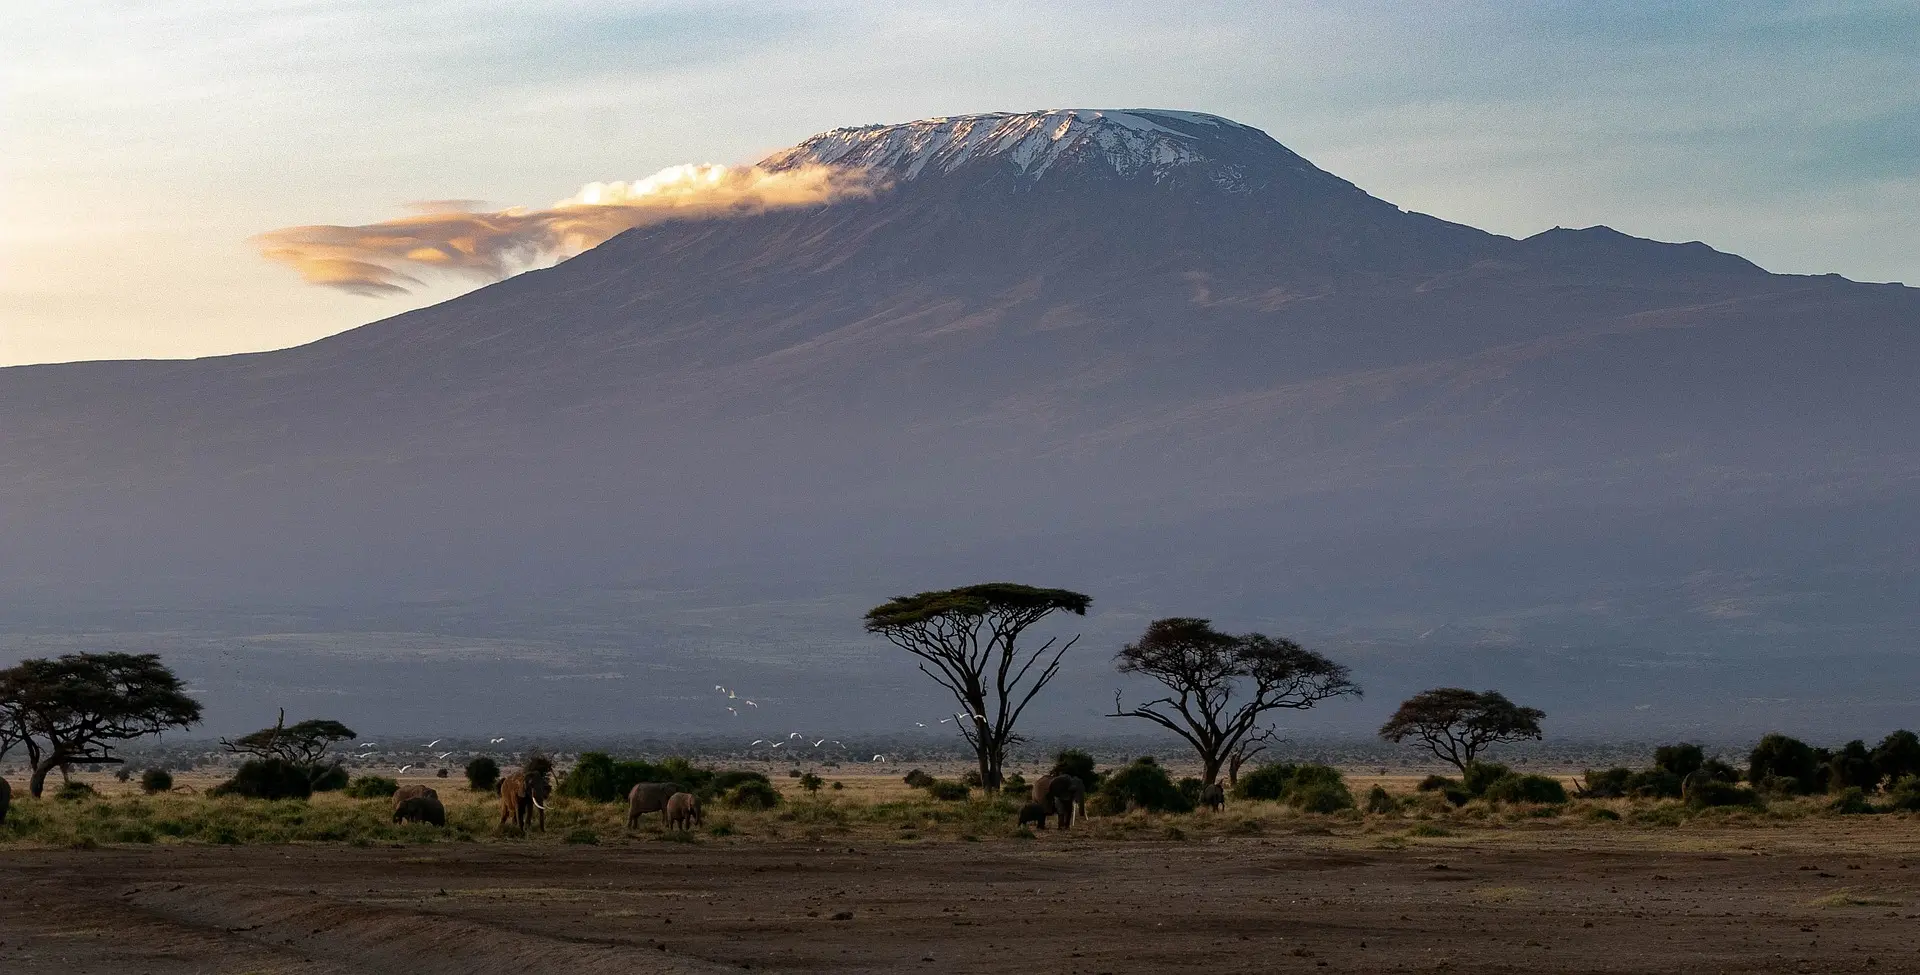 Kenya safari holiday - You could also head straight from your Nairobi hotel into the heart of Amboseli, an elephant paradise.